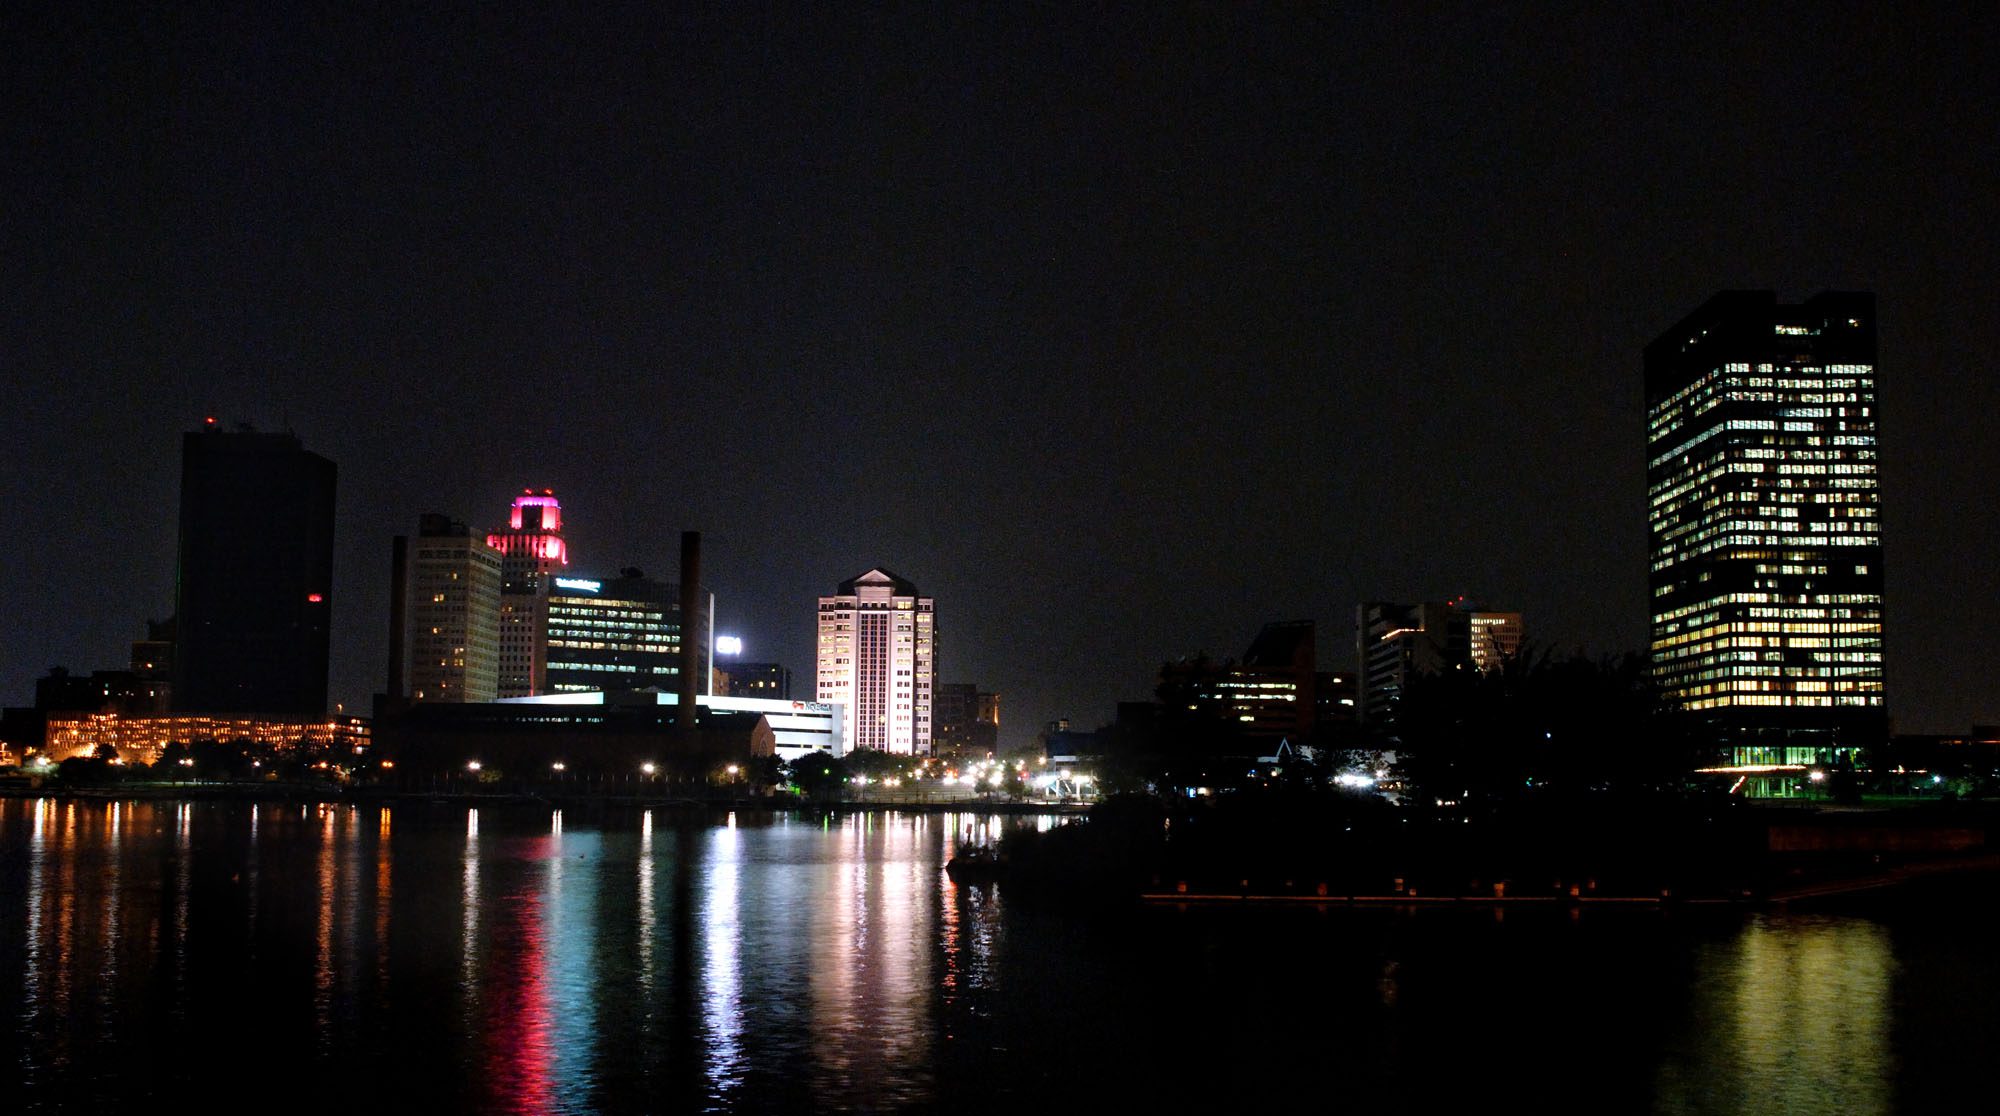 Downtown Toledo over the river at night